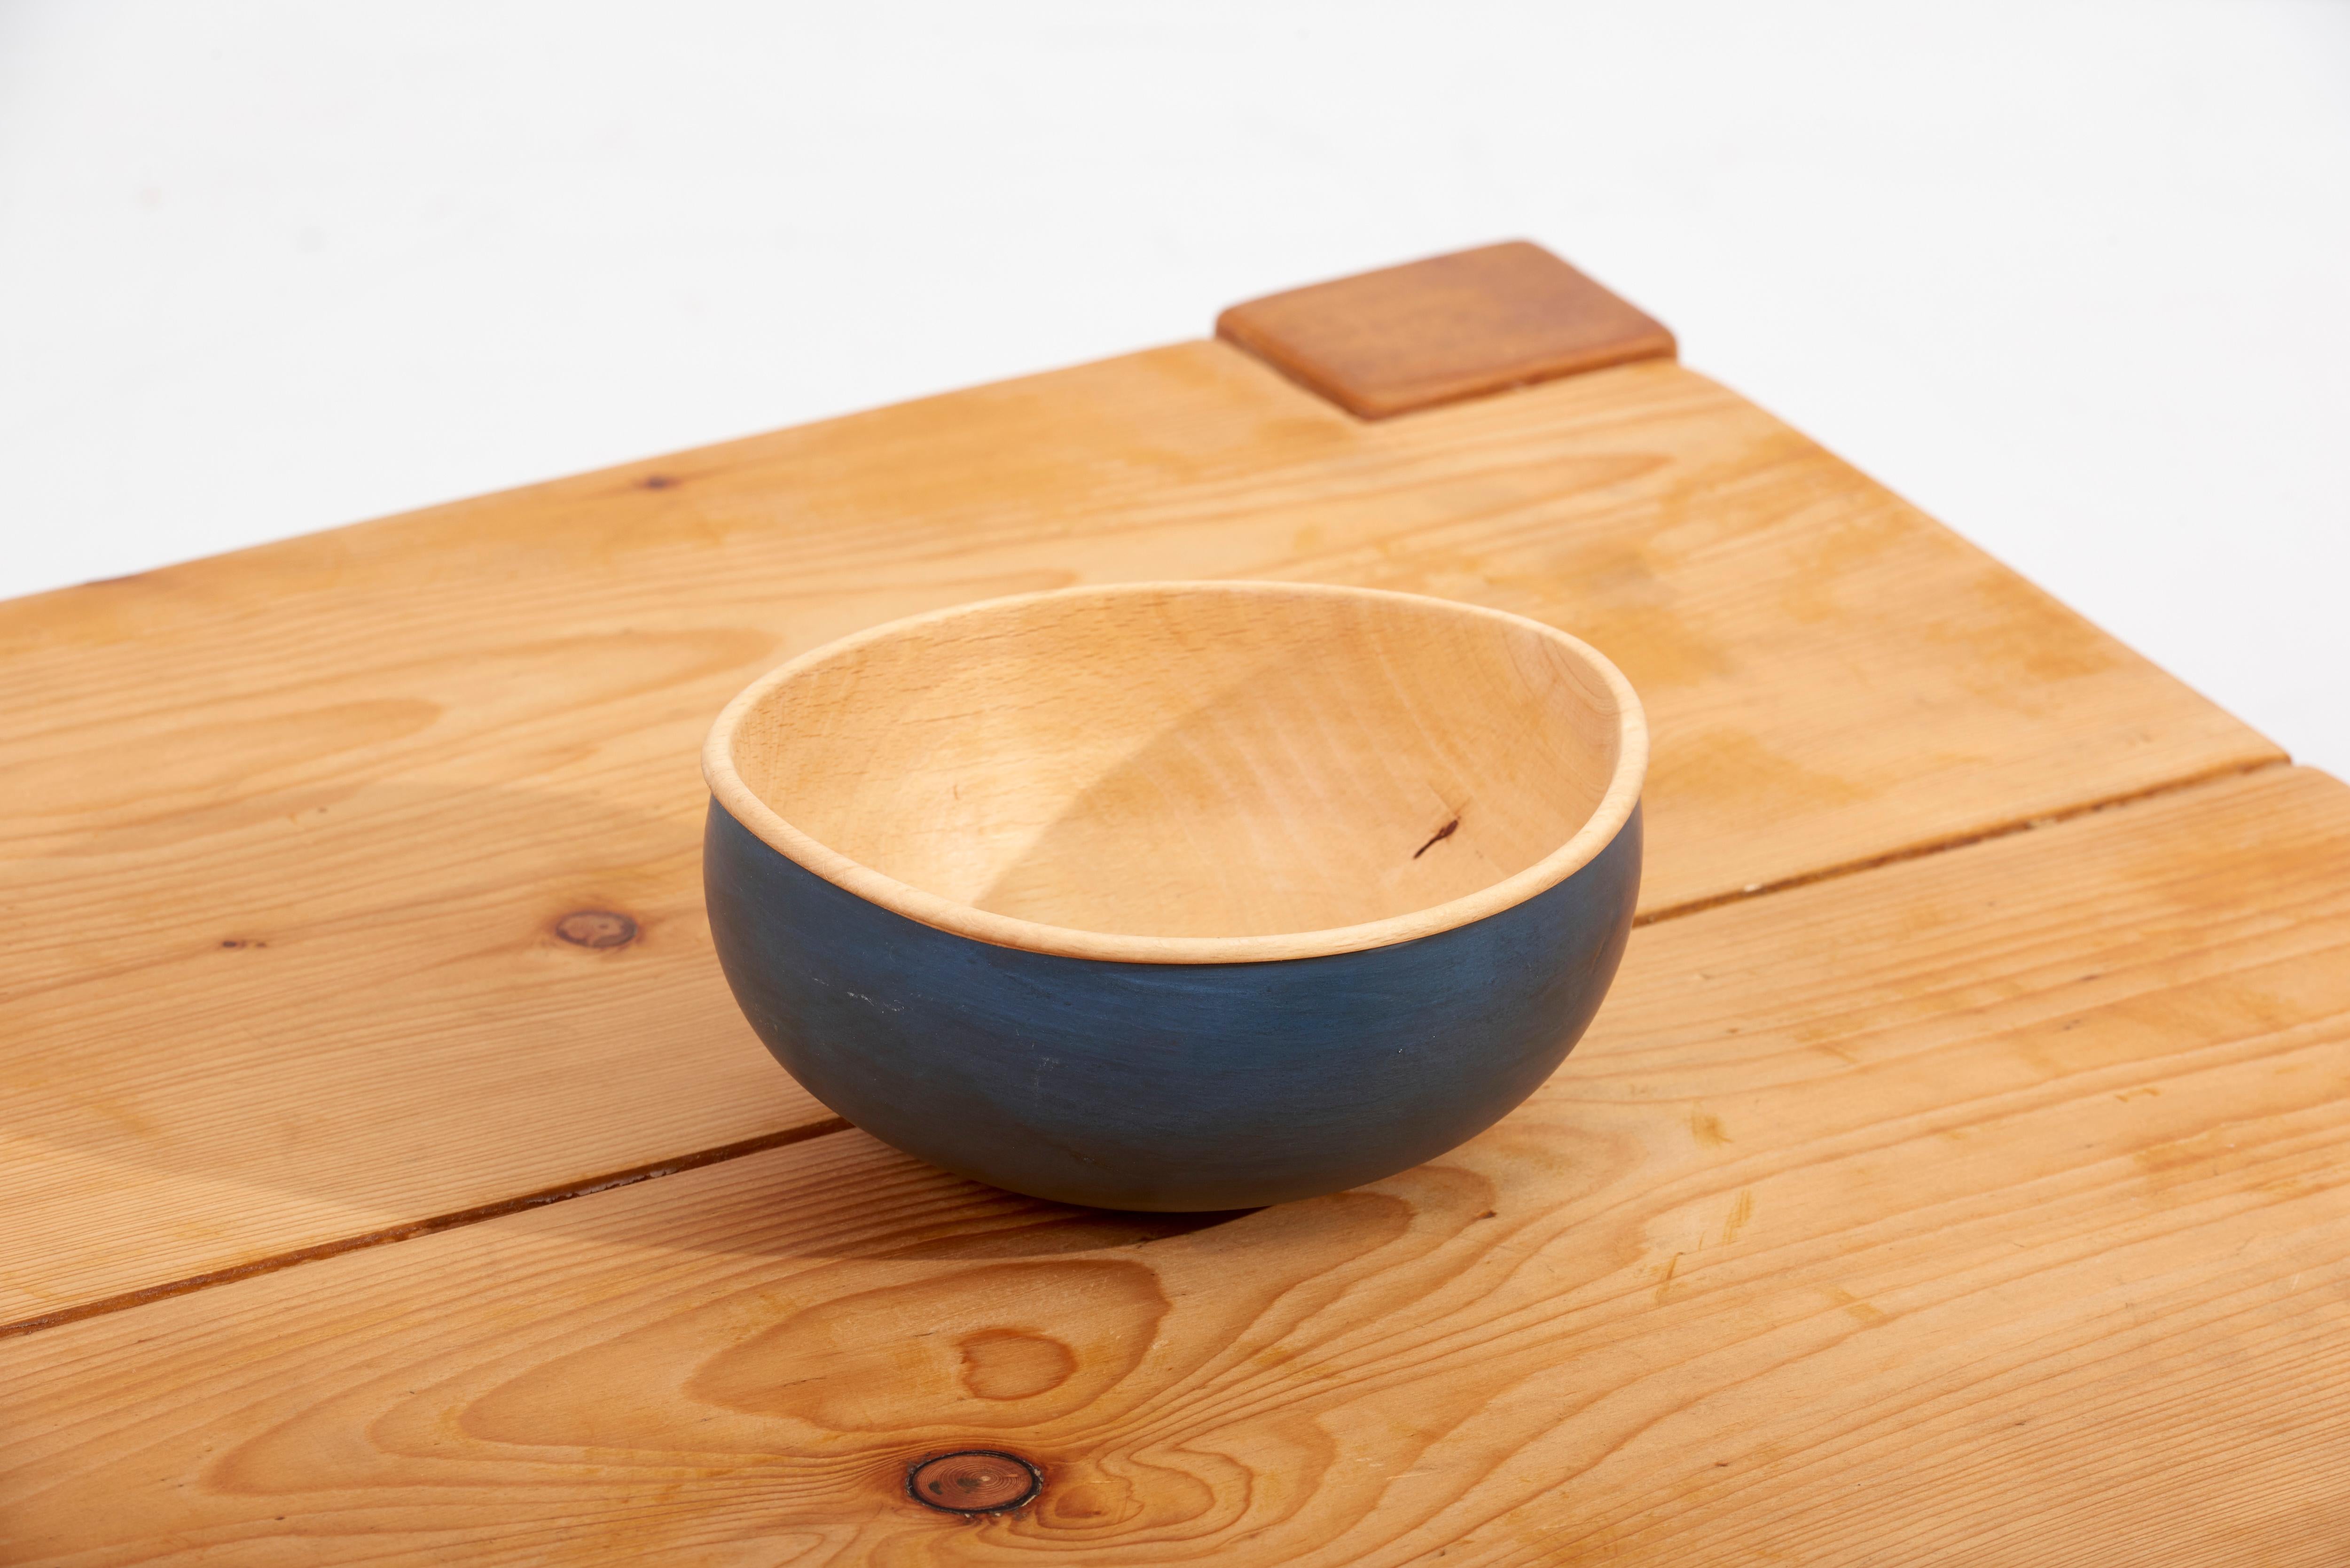 Painted Set of 4 Wooden Bowls by Fabian Fischer, Germany, 2020